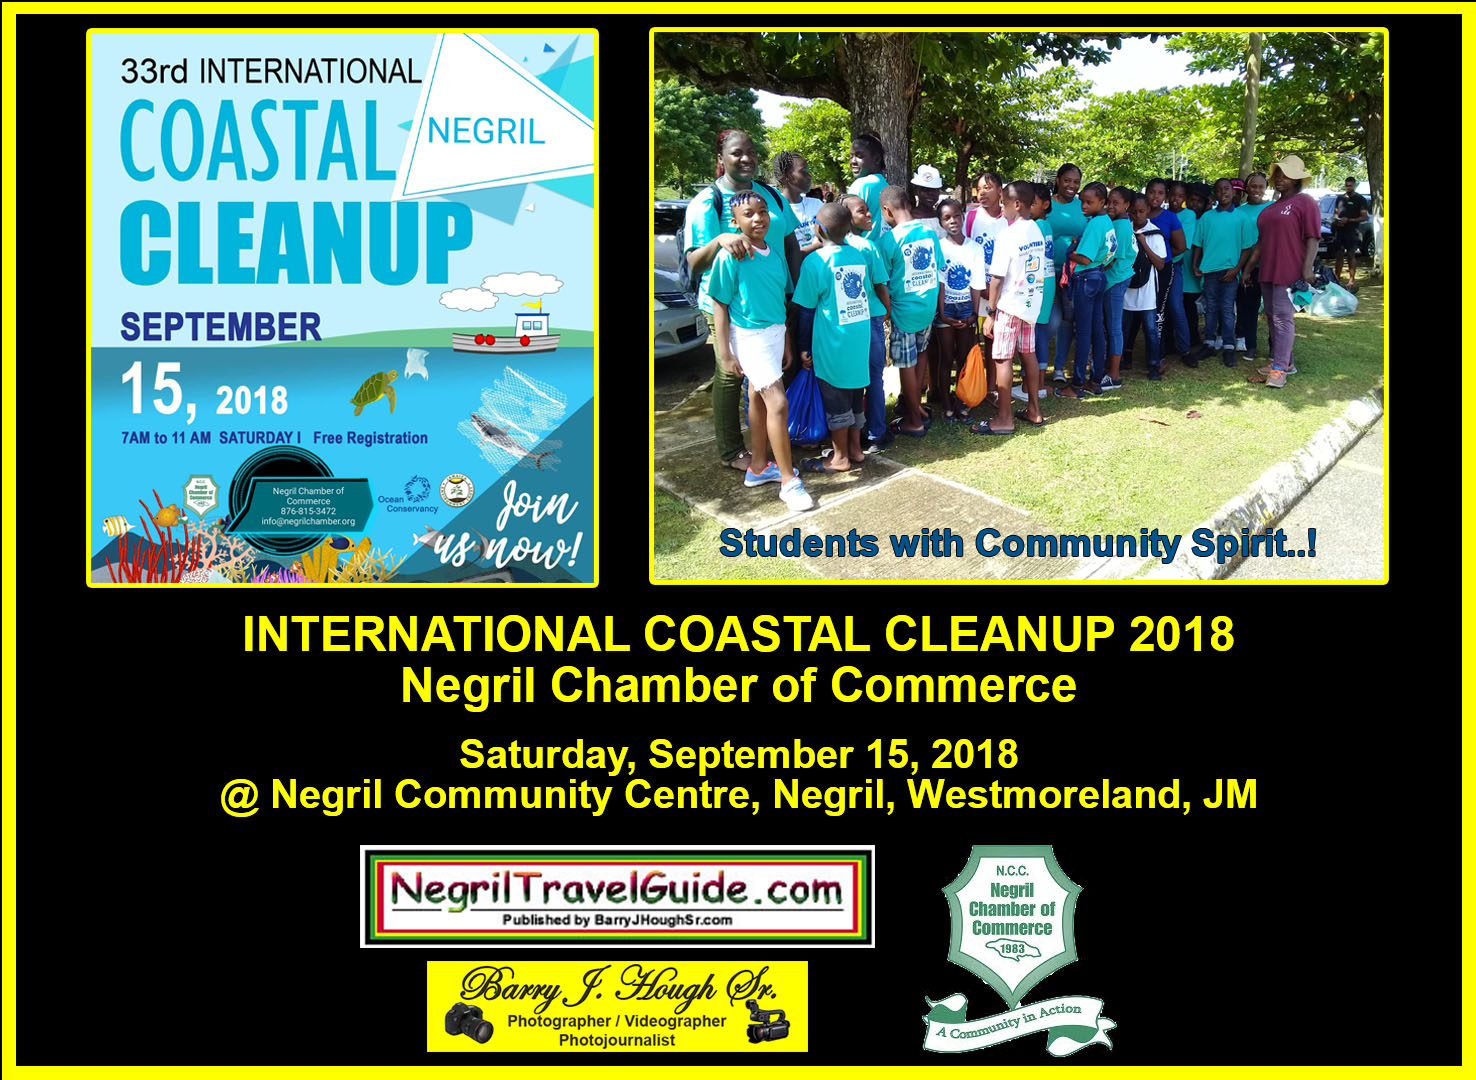 International Coastal Cleanup Day 2018 in Negril